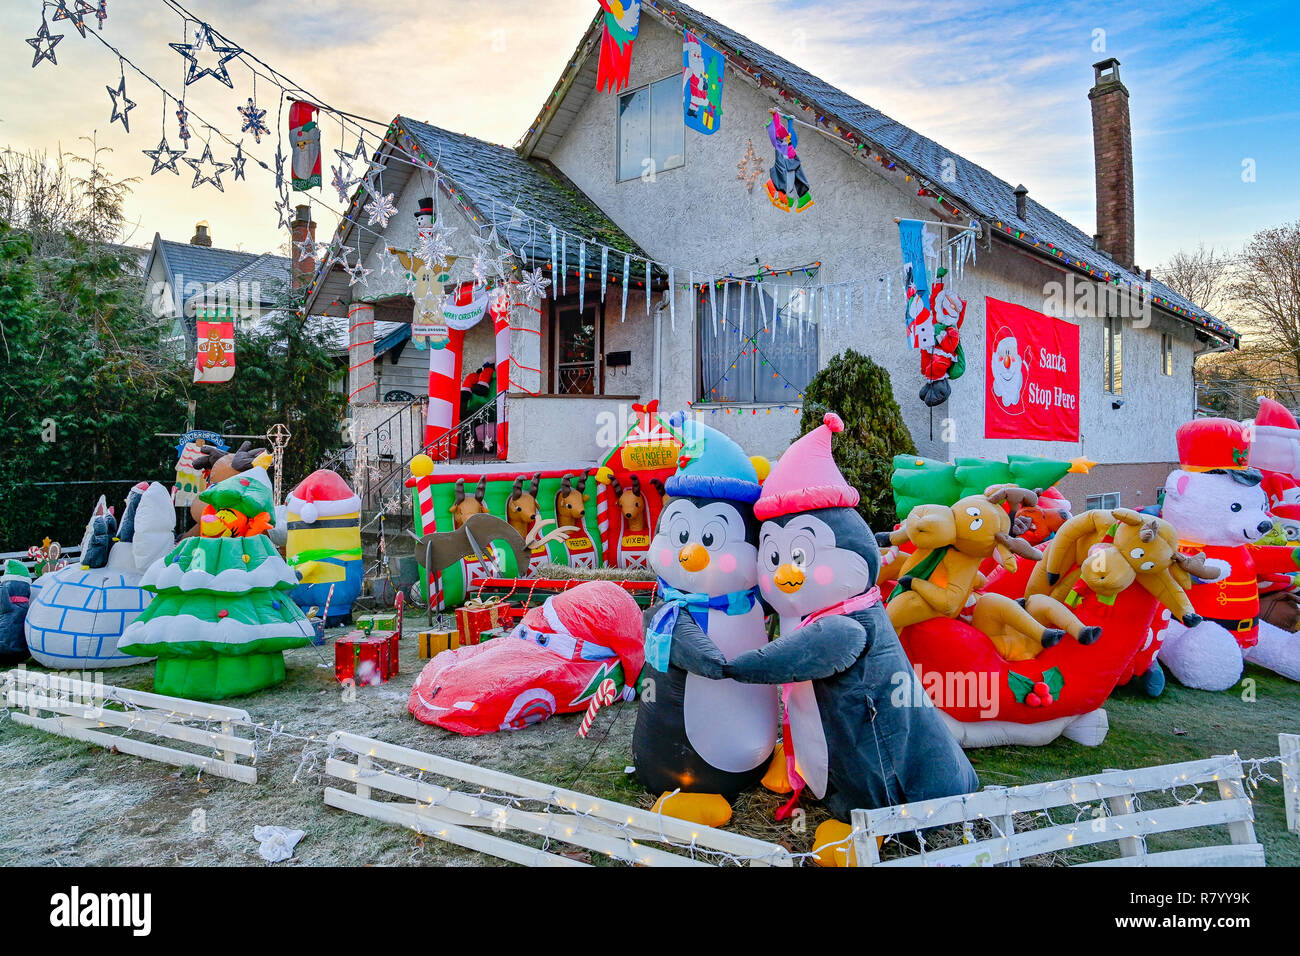 Front lawn, Christmas dislpay, inflatable plastic, kitsch, penguins, hugging Stock Photo